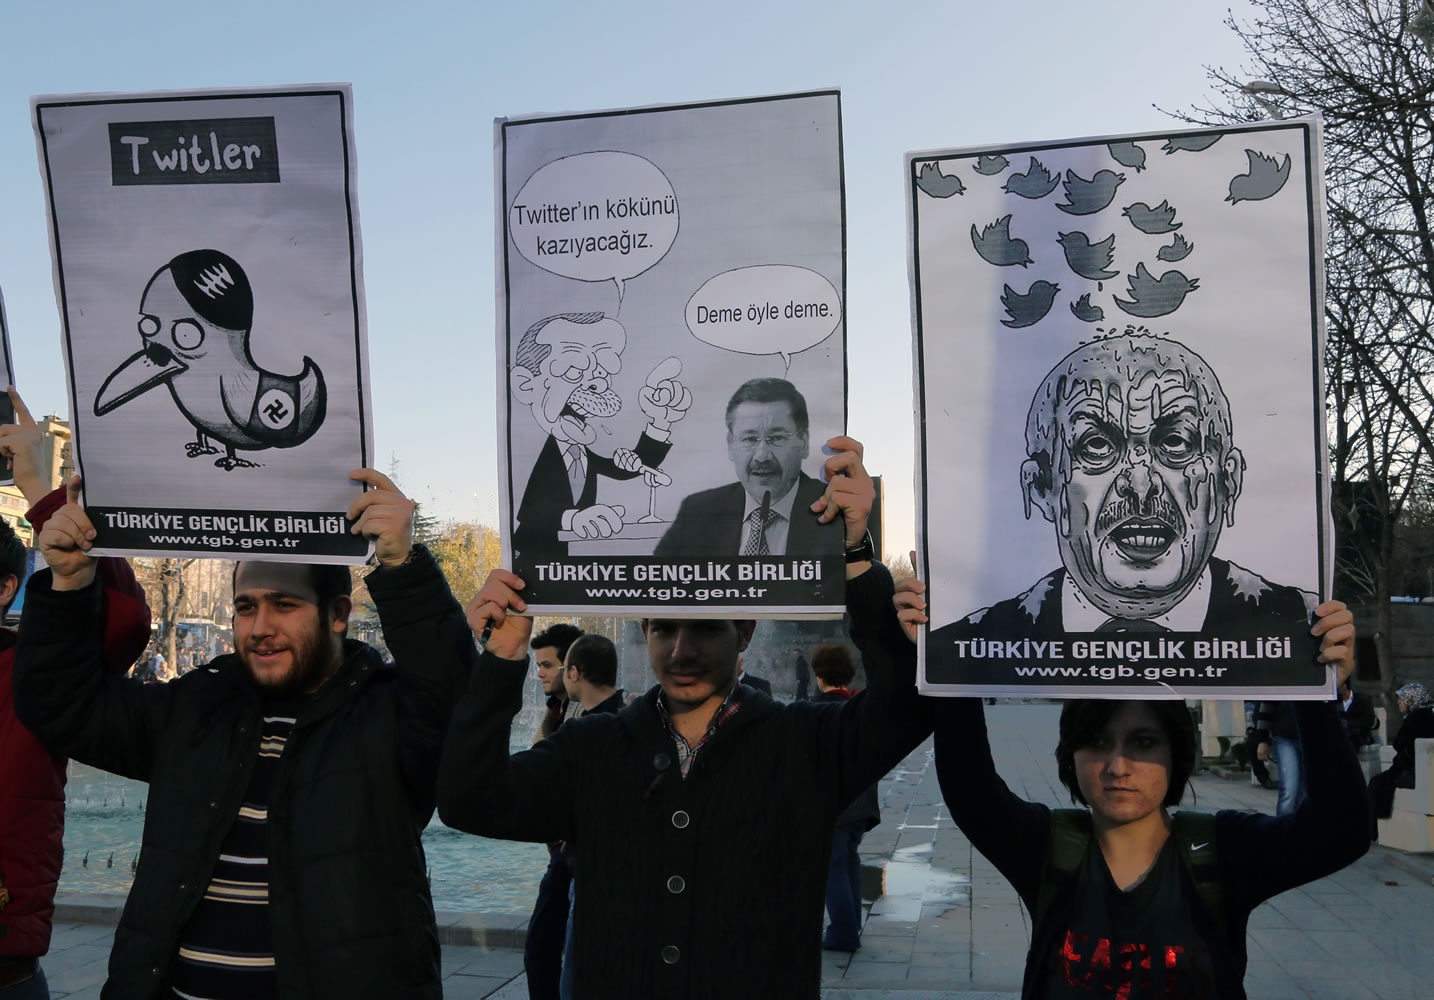 Members of the Turkish Youth Union hold cartoons depicting Turkey's Prime Minister Recep Tayyip Erdogan during a protest against a ban on Twitter in Ankara, Turkey, on Friday.